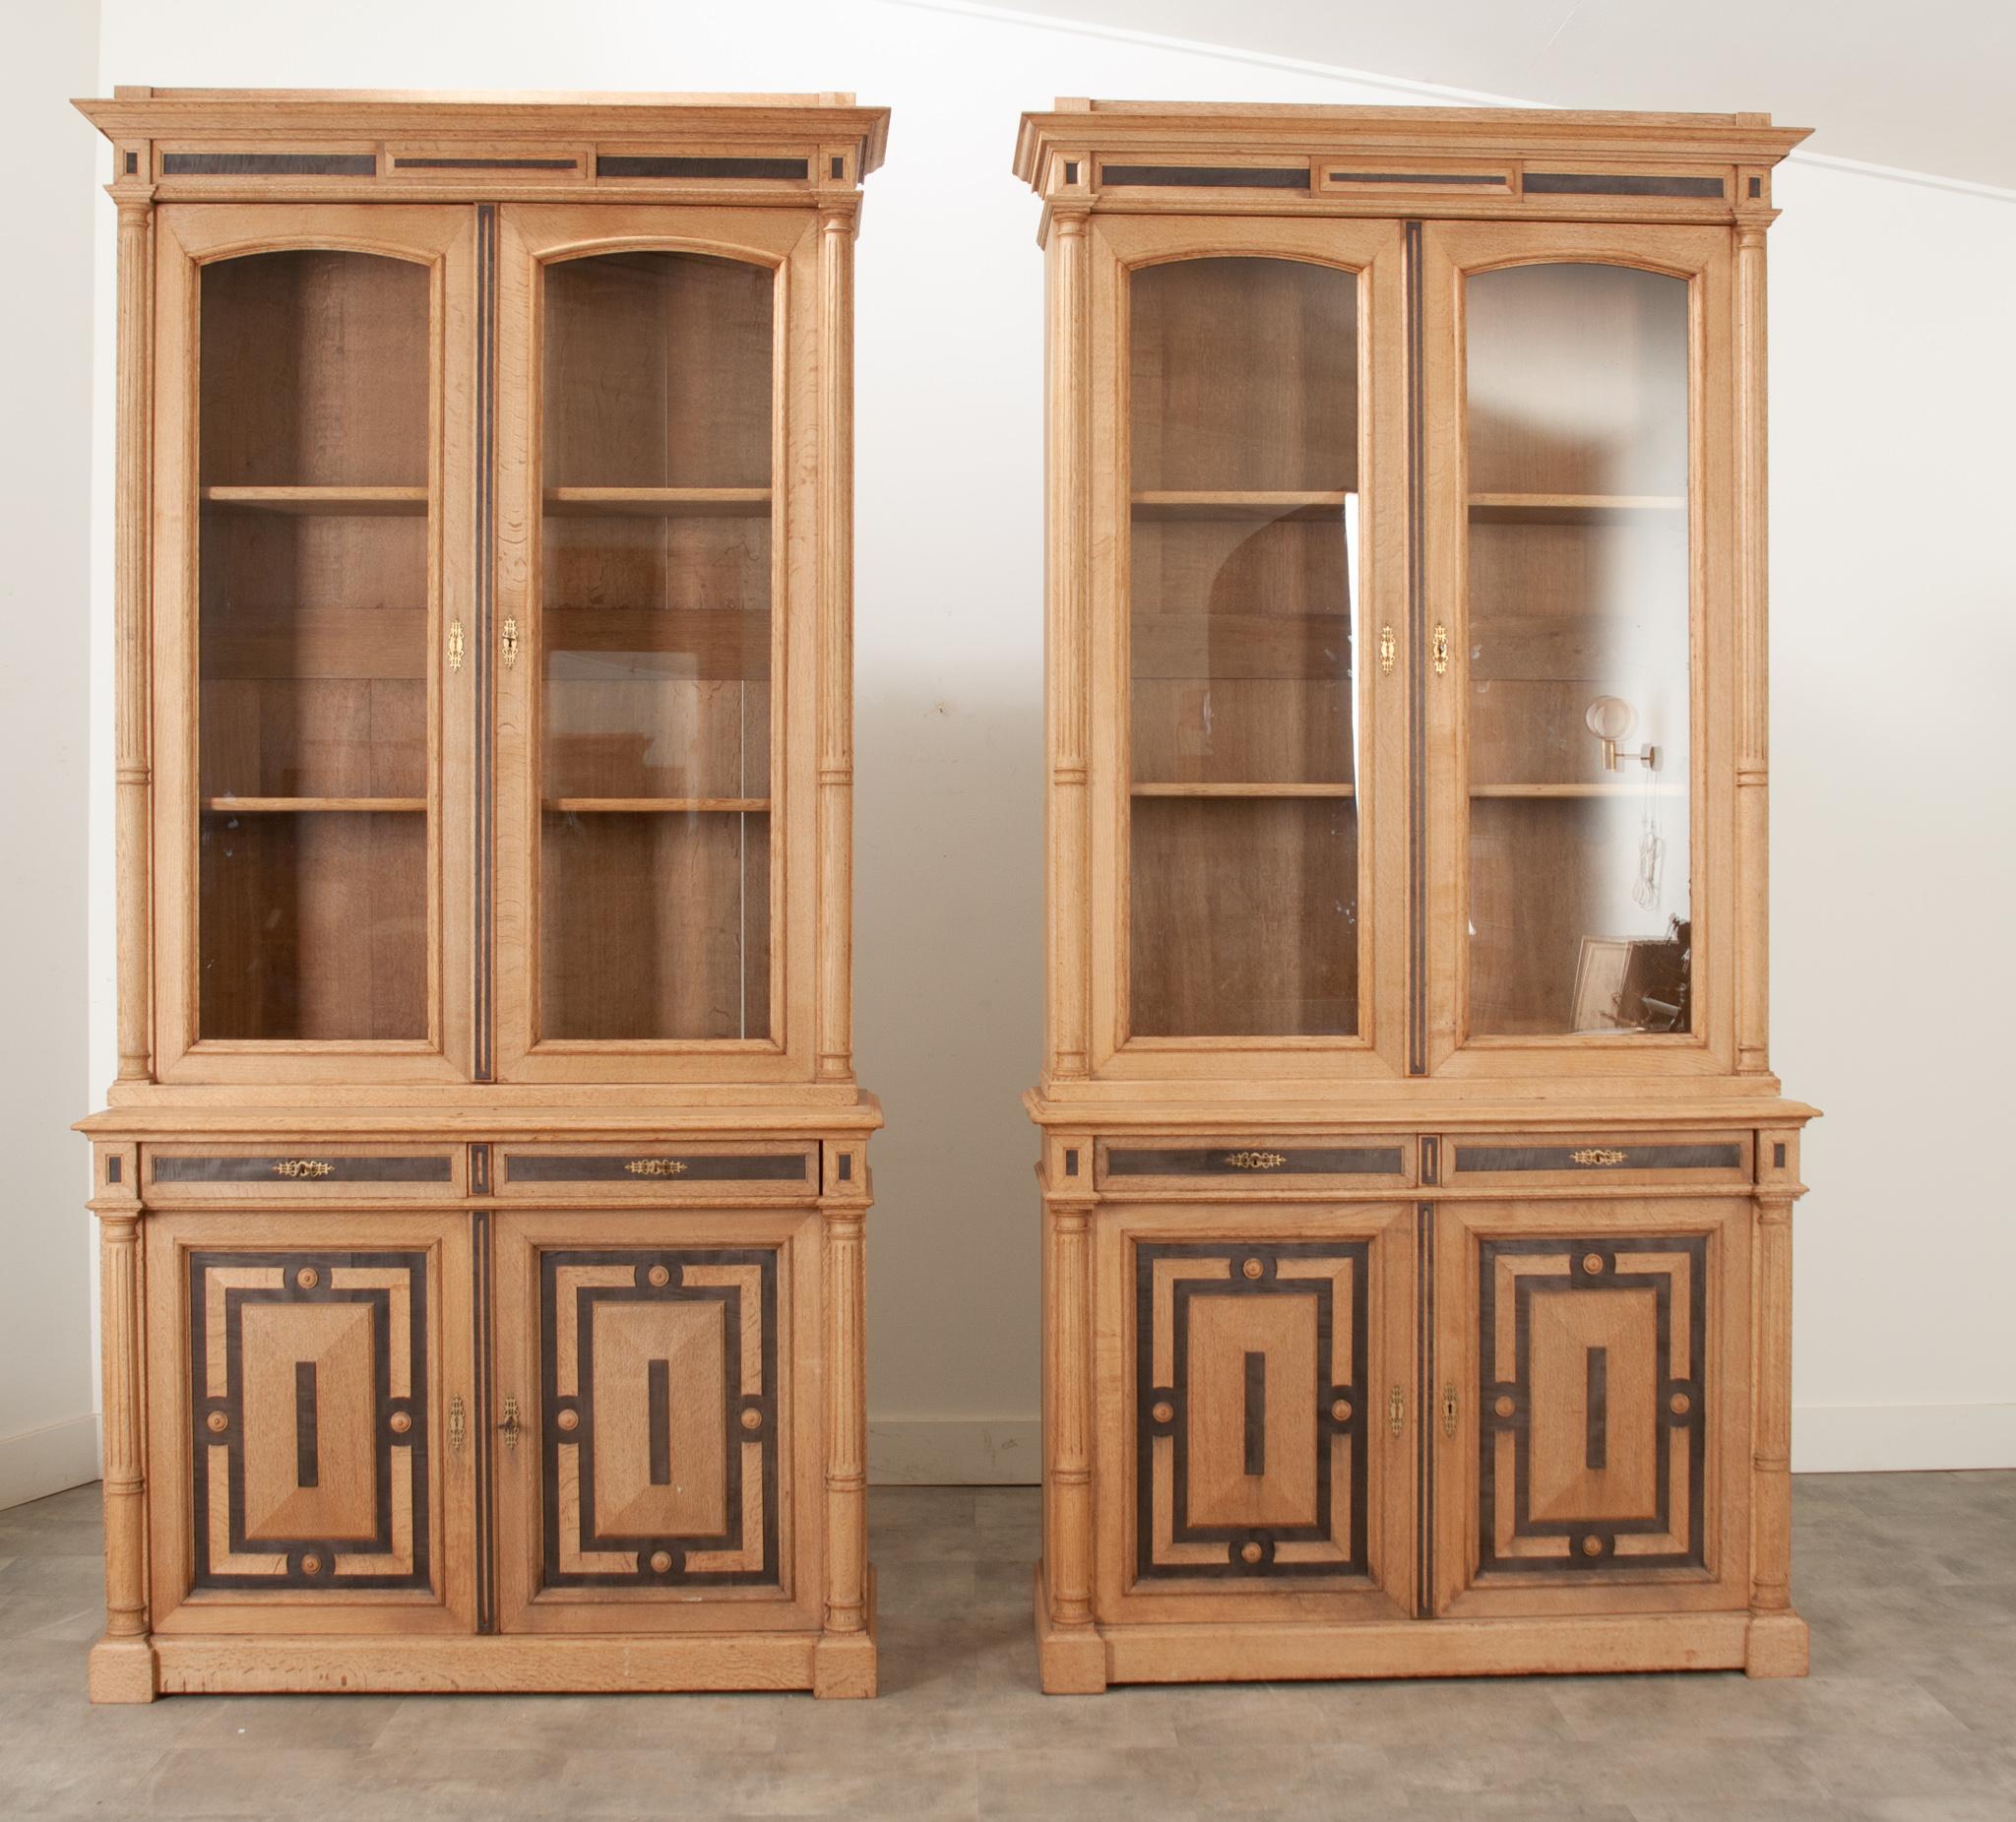 A pair of bleached oak bookcases stand at 8.5 feet tall and make a huge impact together.  The contrast of wood finishes makes it easy to incorporate with your existing decor. Each glass front case houses two adjustable shelves. The lower storage